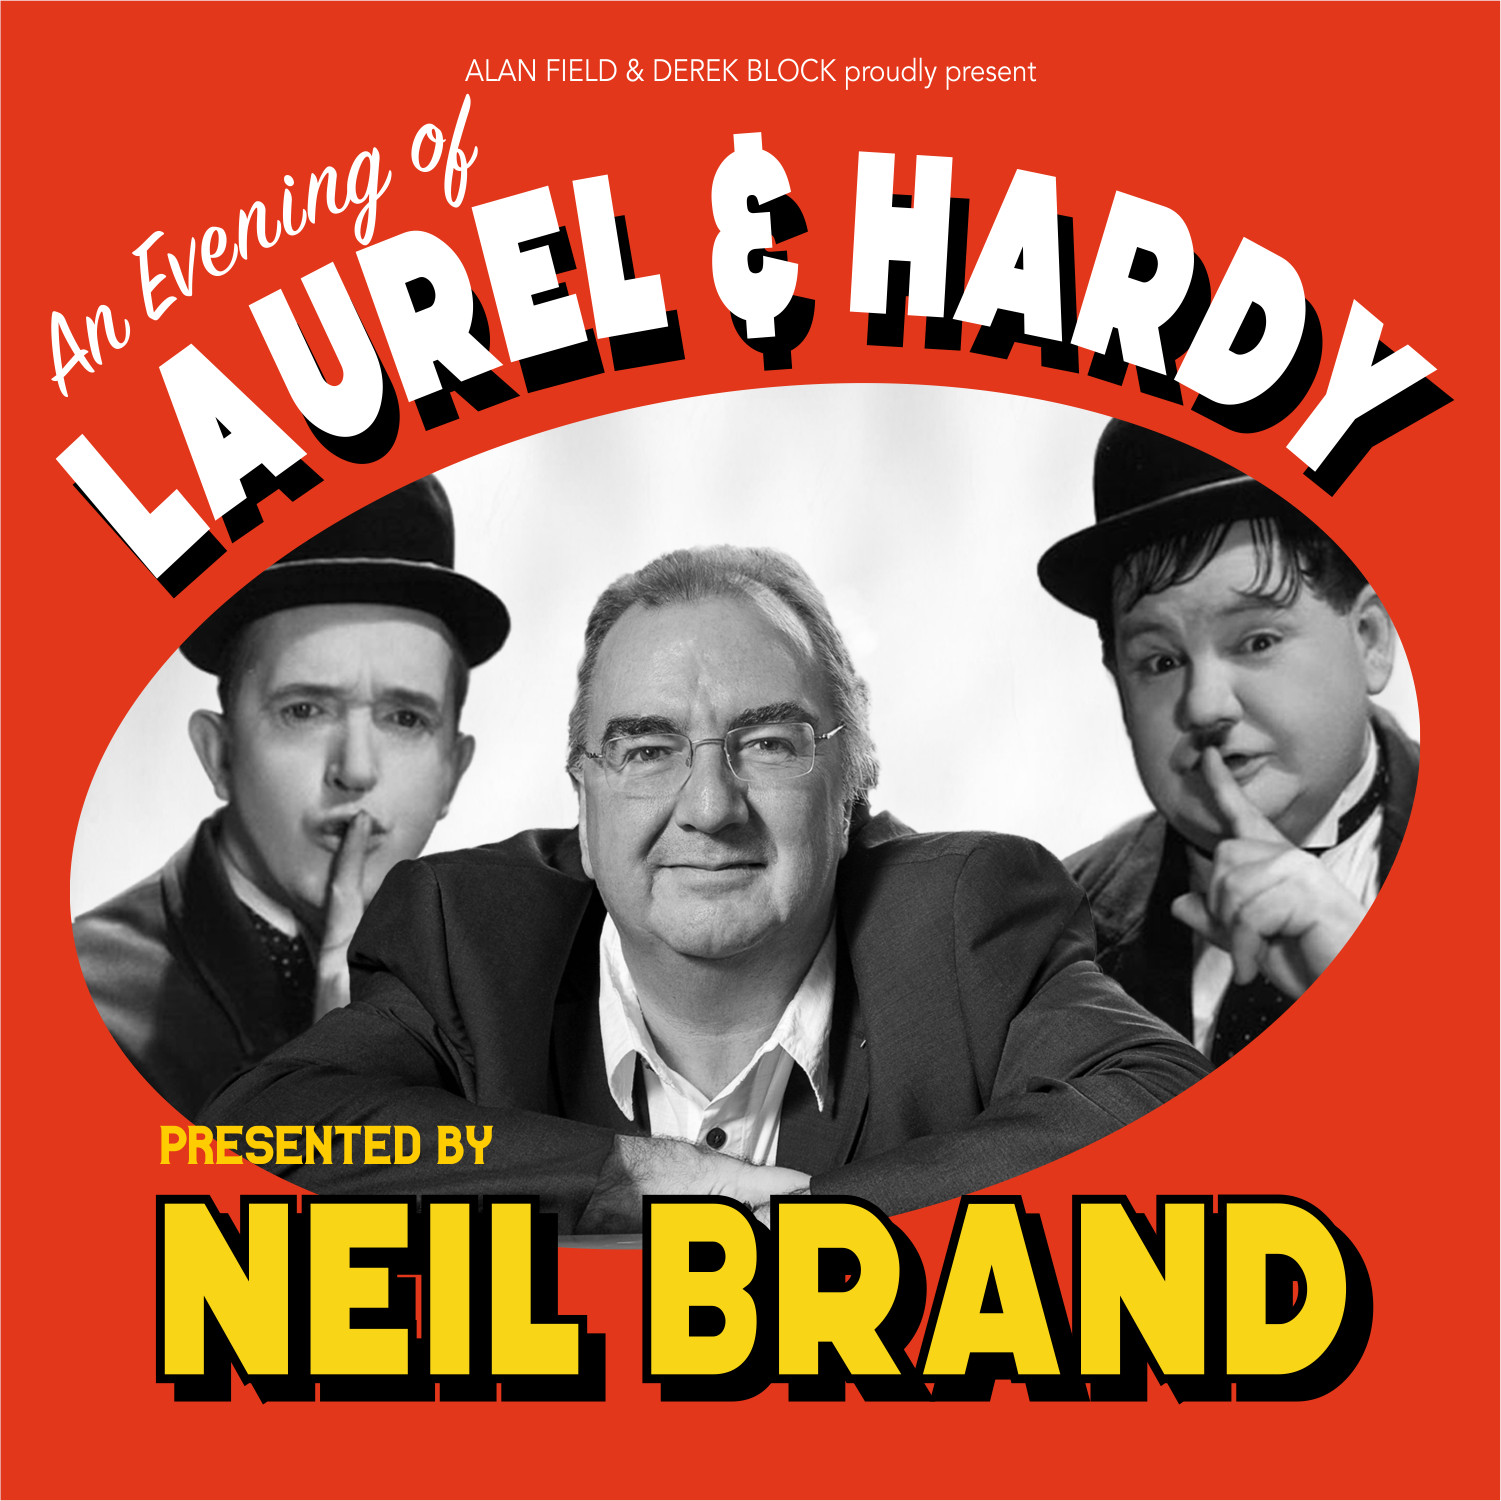 An Evening with Laurel & Hardy – Presented by Neil Brand